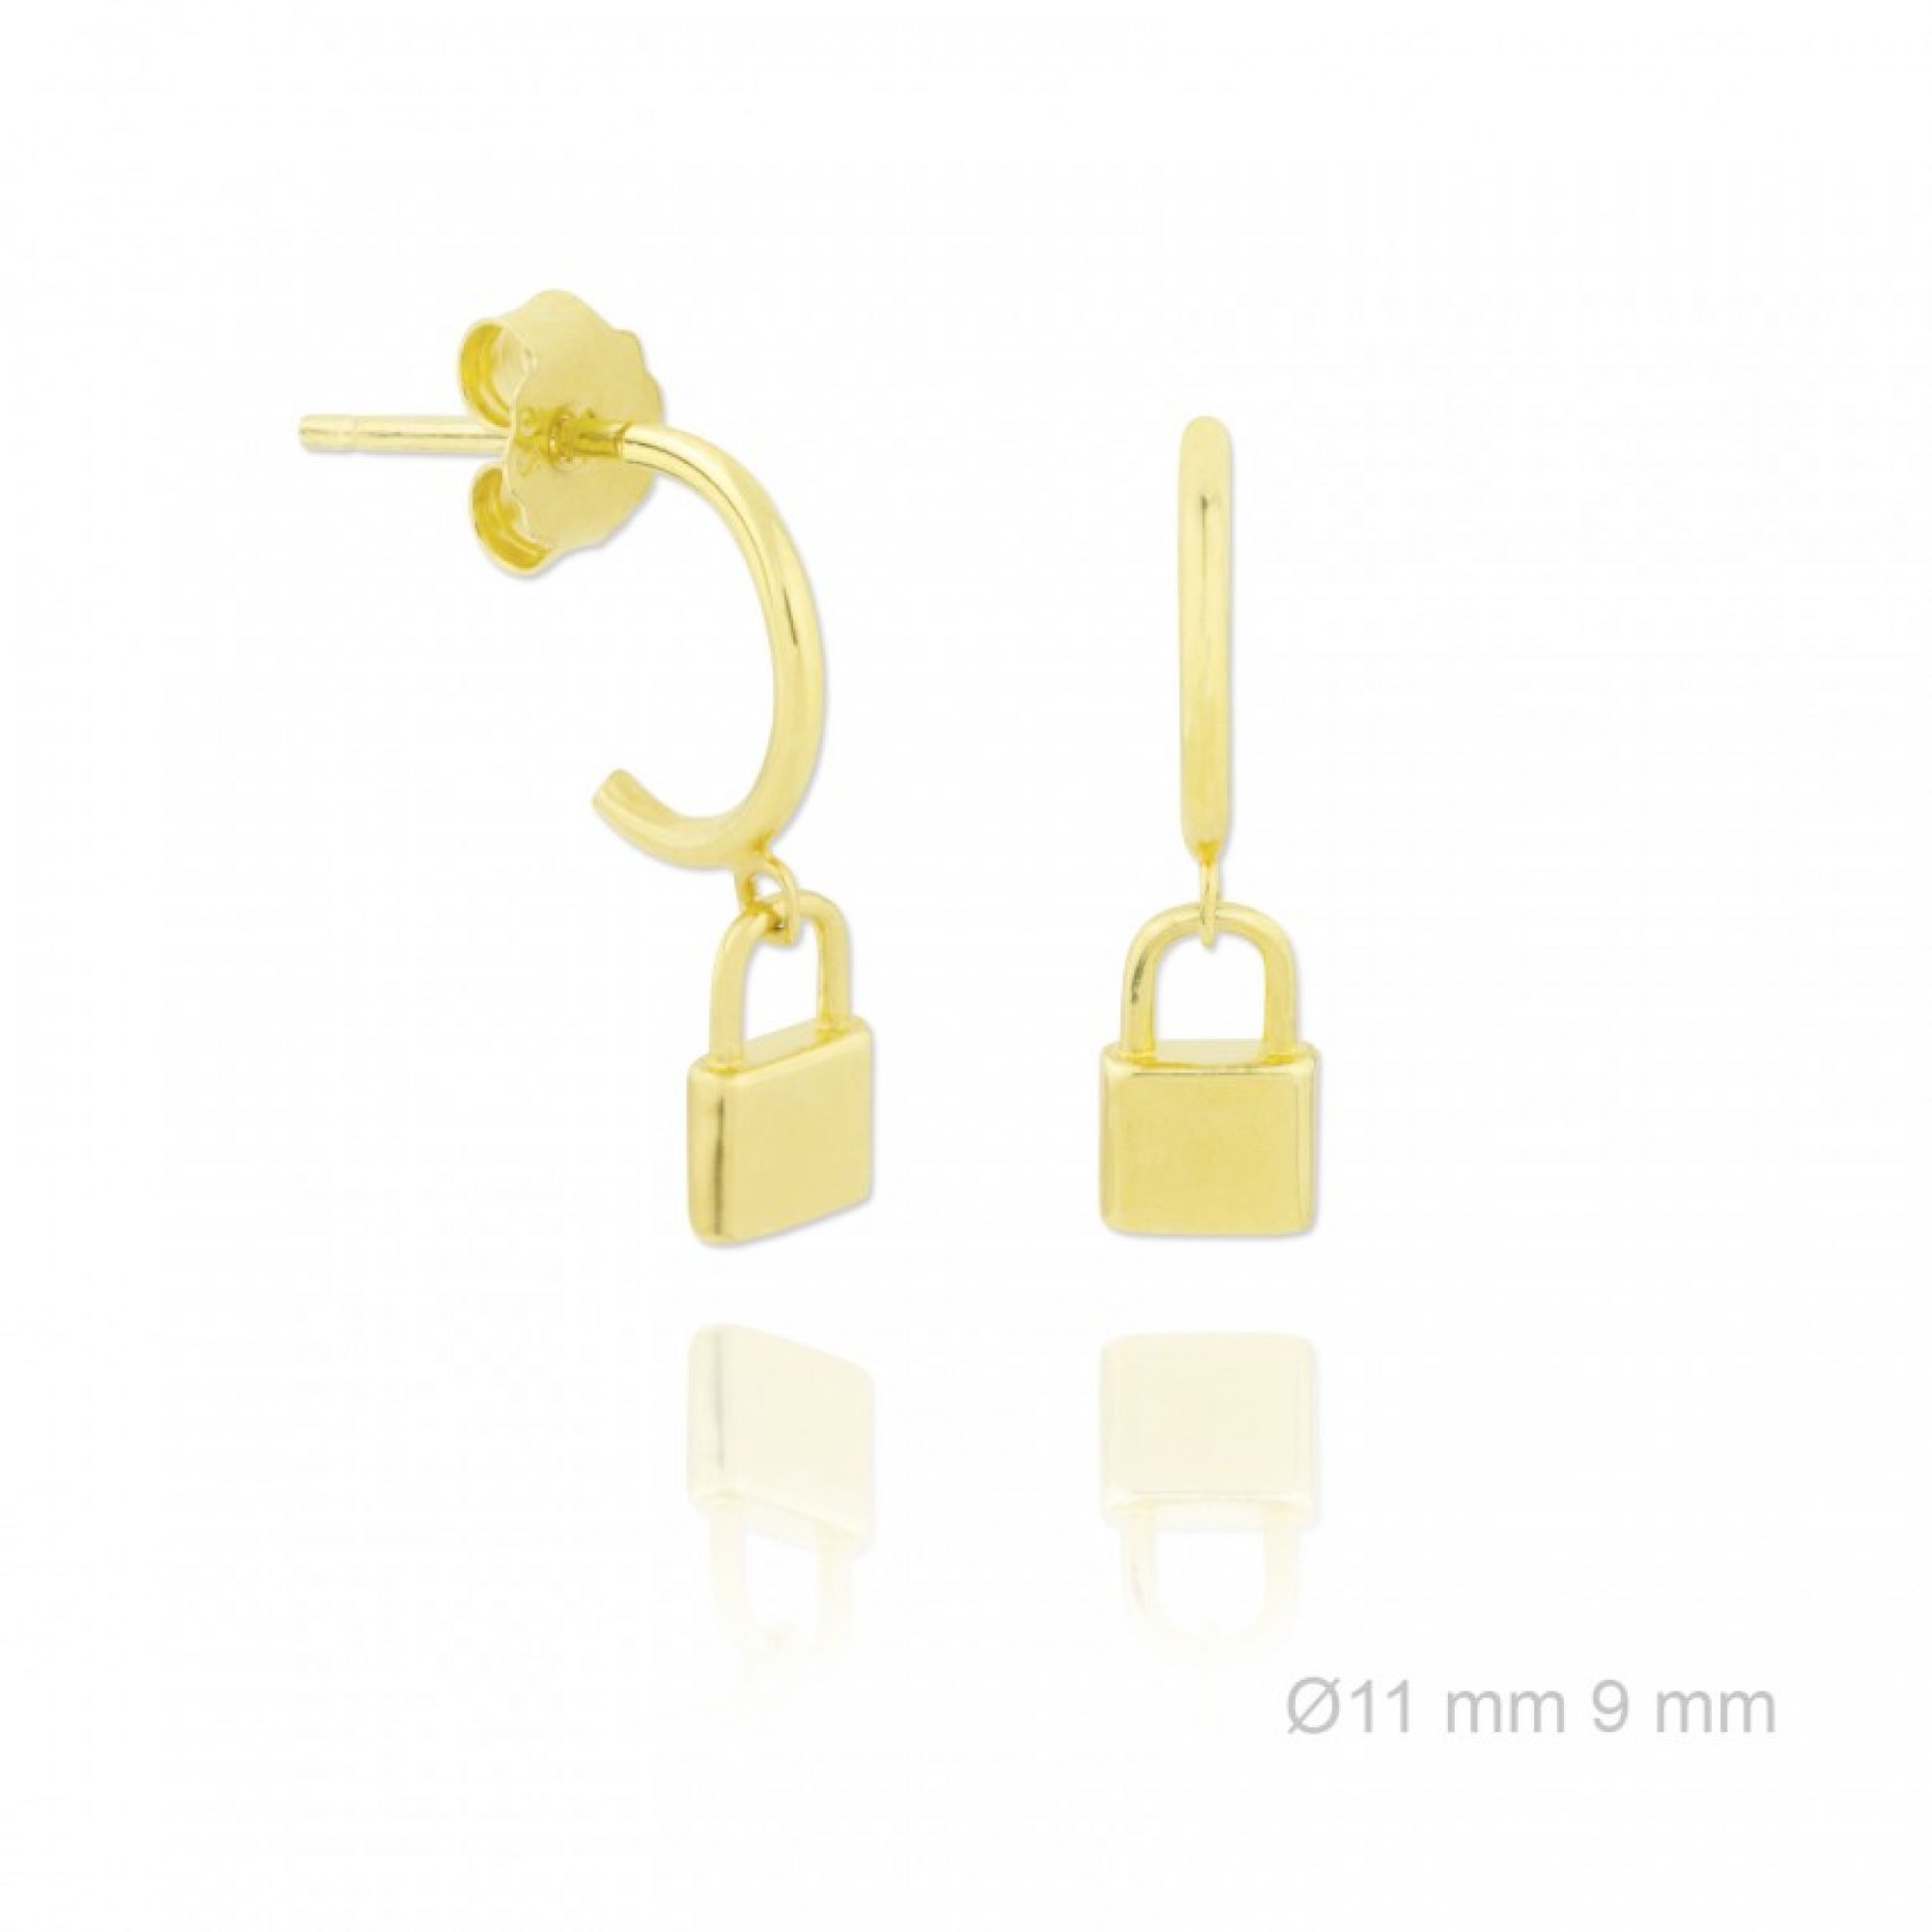 Gold plated earrings with dangle lock